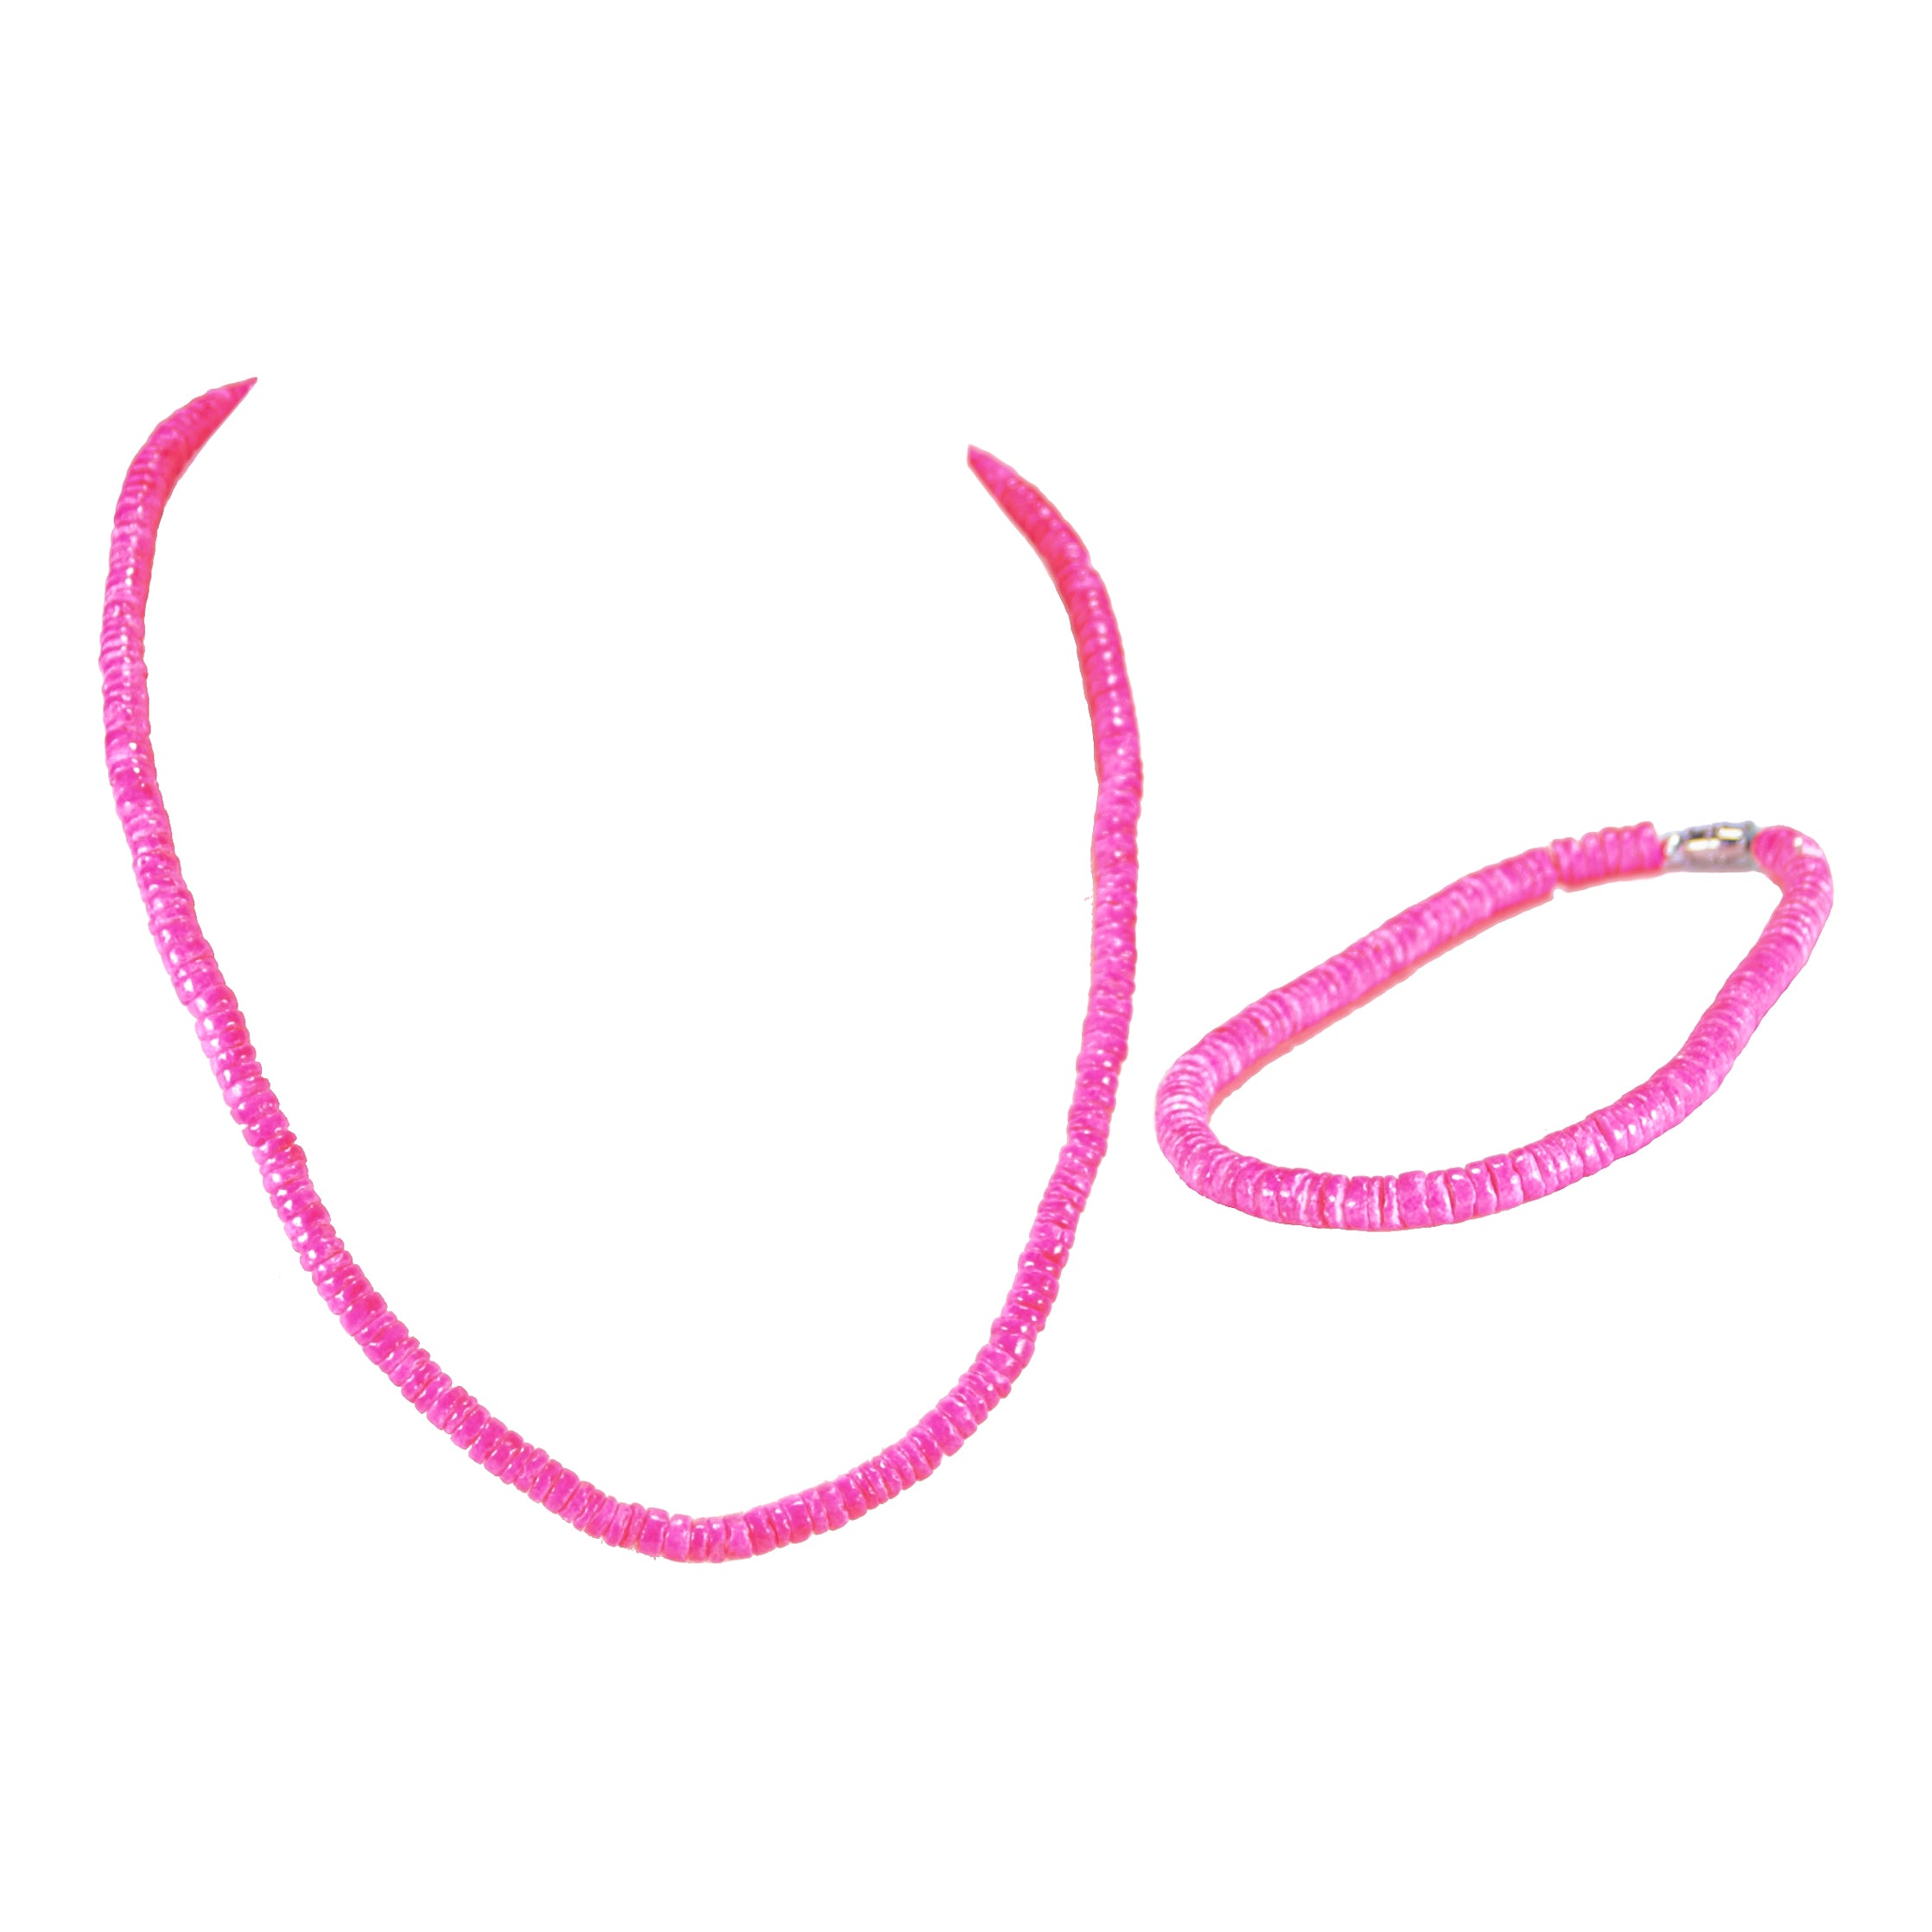 Neon Pink Puka Shell Beads Necklace and Anklet Set